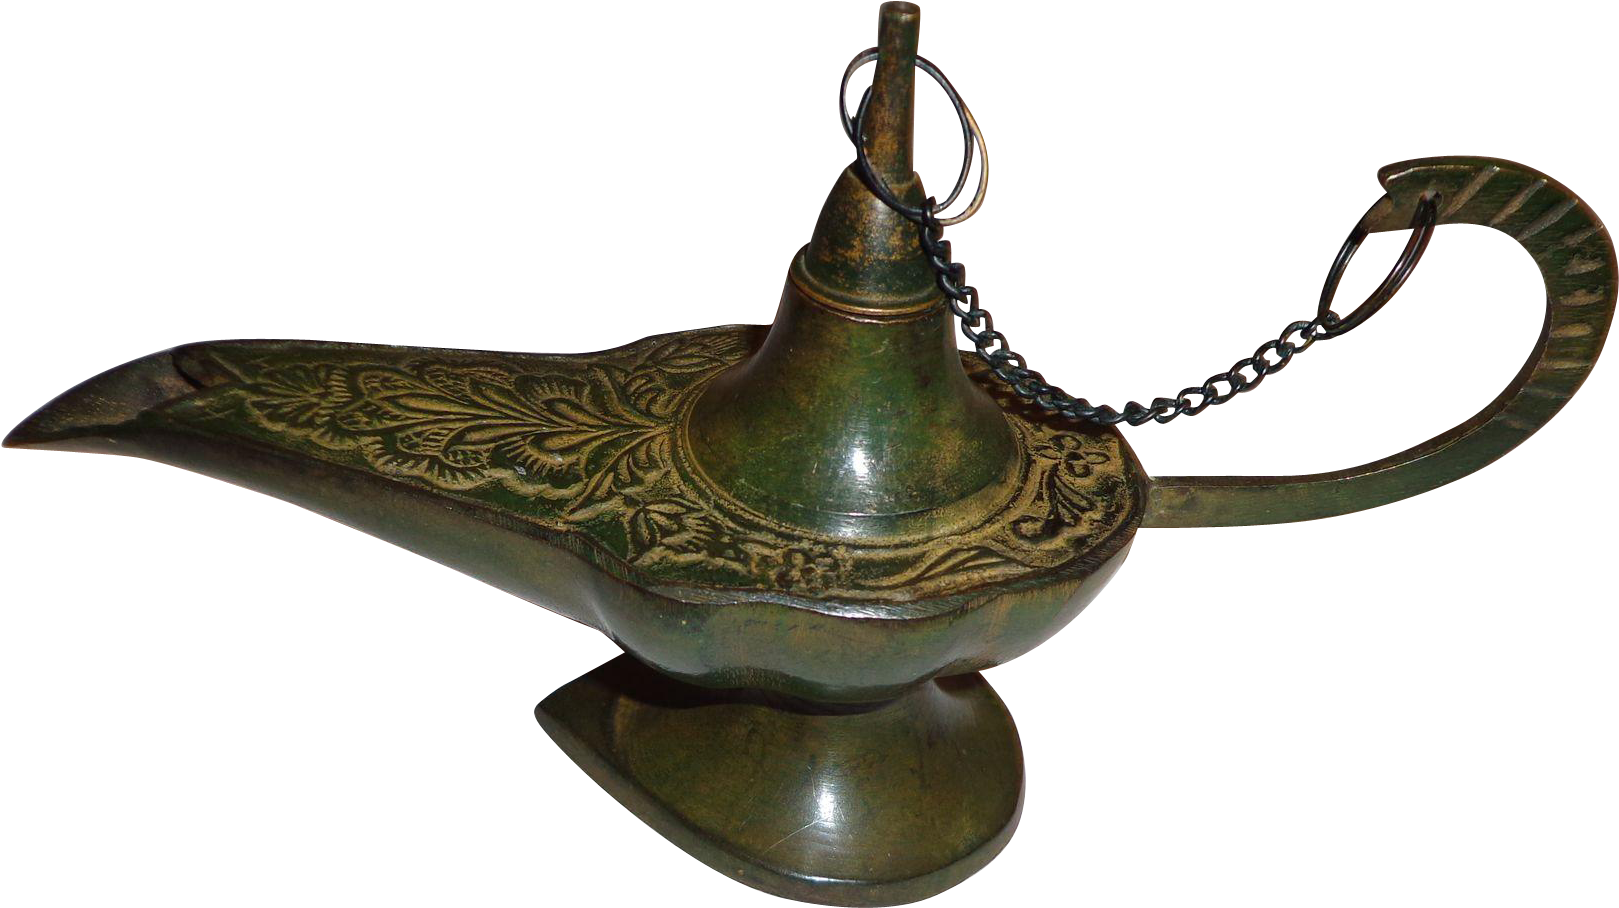 Genie Lamp PNG Free Photo PNG Image